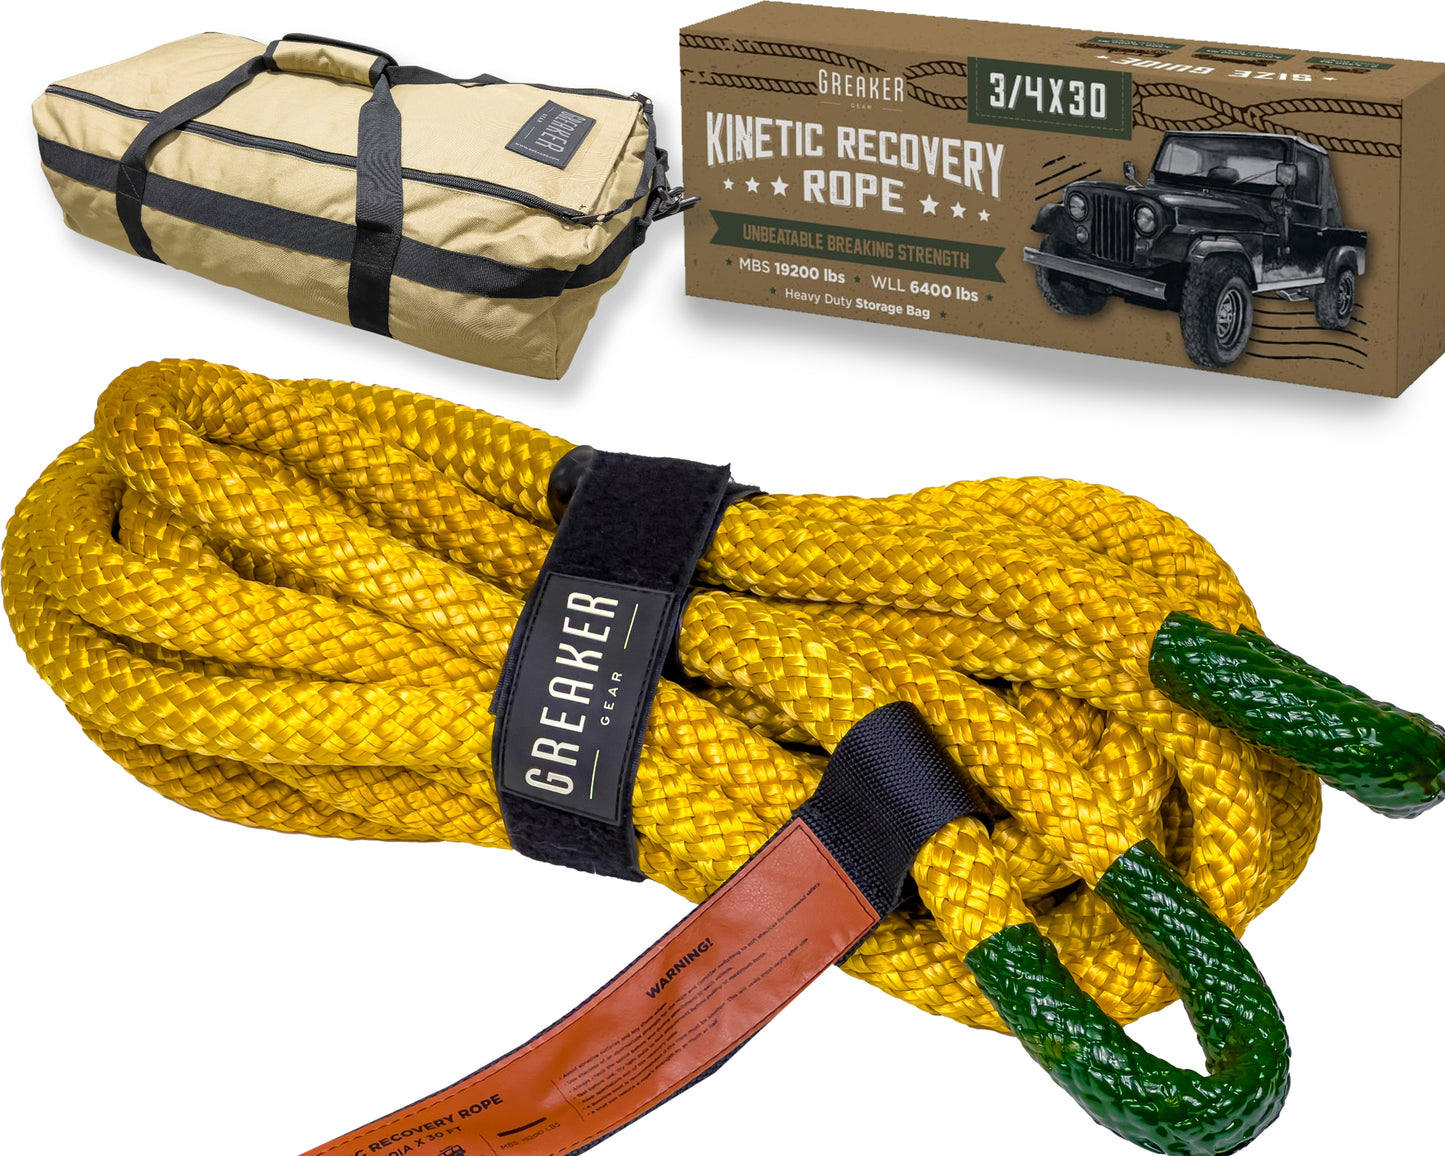 Greaker Limited Edition Kinetic Recovery Tow Rope Heavy Duty Offroad - Unique 4x4 Style (Gold Sahara, 3/4" x30')